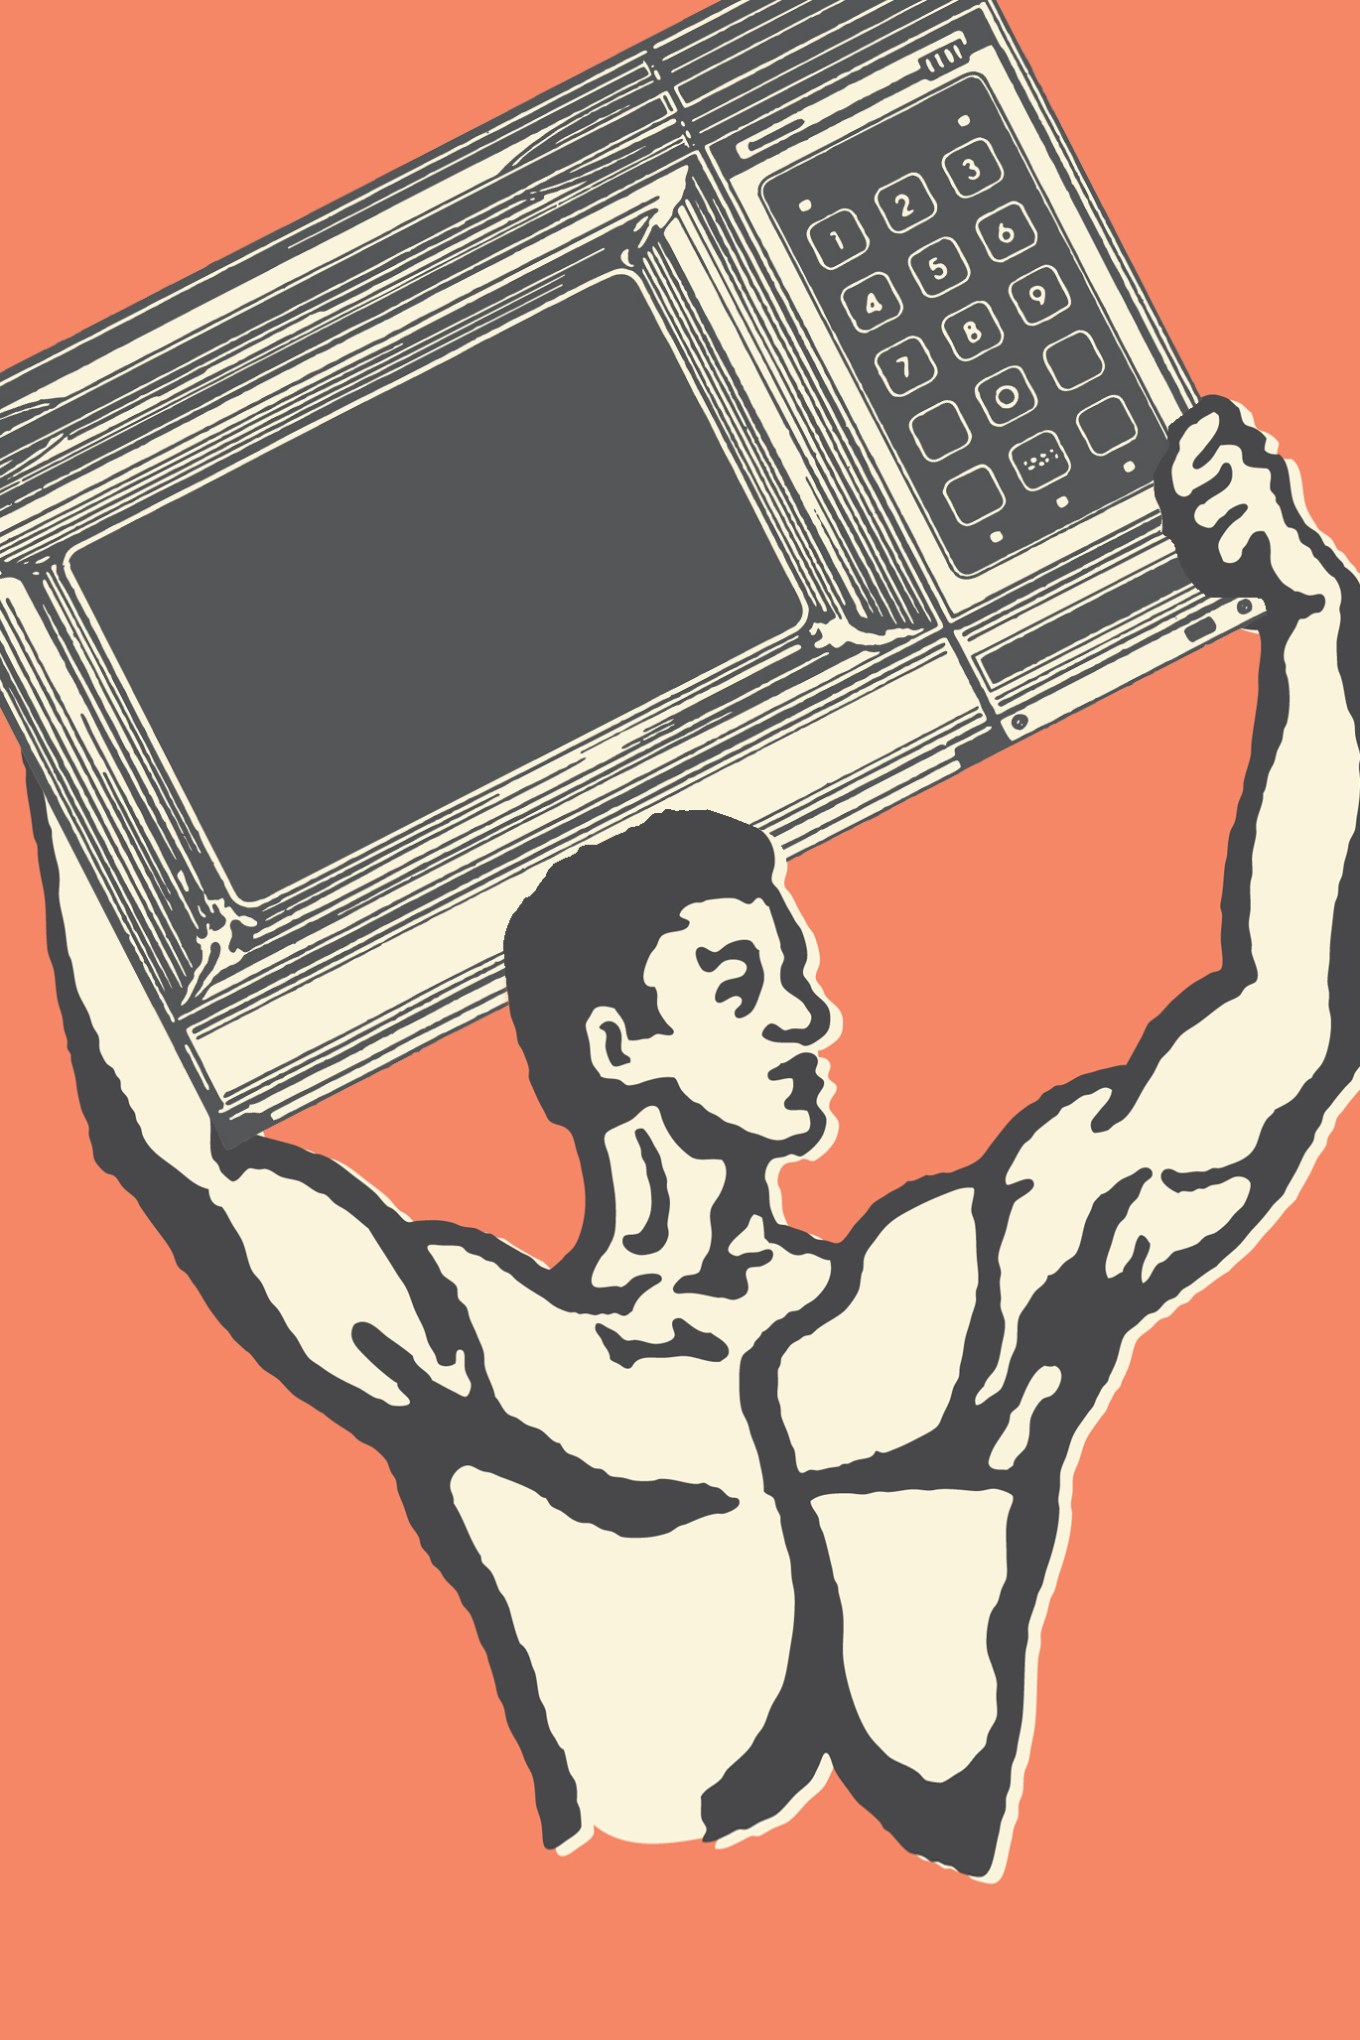 Illustration of strongman holding microwave above his head